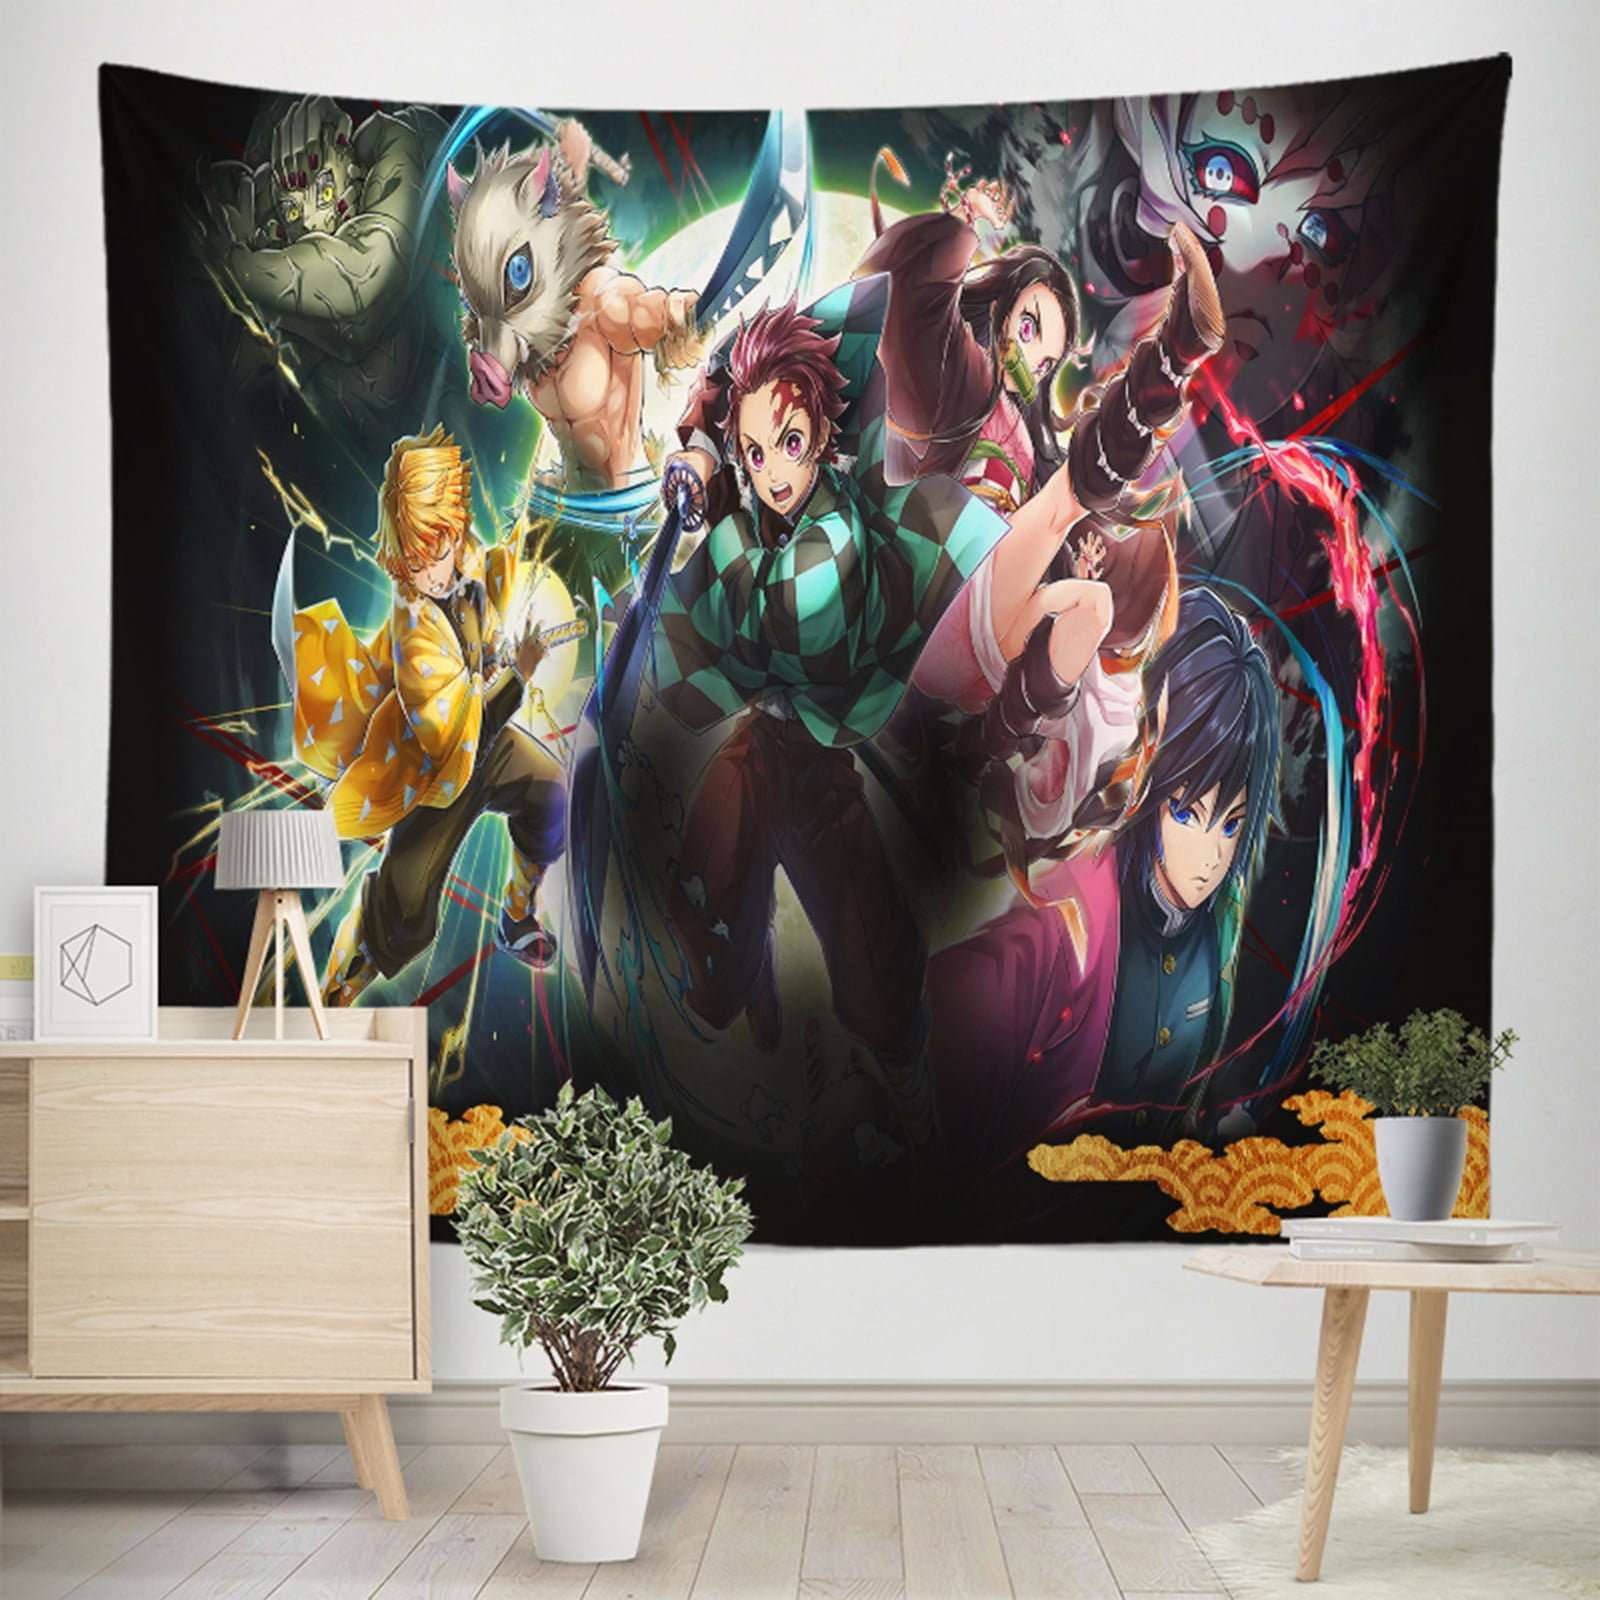 RAGING RHINO Demon Slayer Tapestry Anime Tapestry Cartoon Poster Background Tapestry  Wall Hanging for Living Room College Dormitory Room Home Decoration 60x40  InchesButterfly Girl Demon Slayer  Amazonin Home  Kitchen